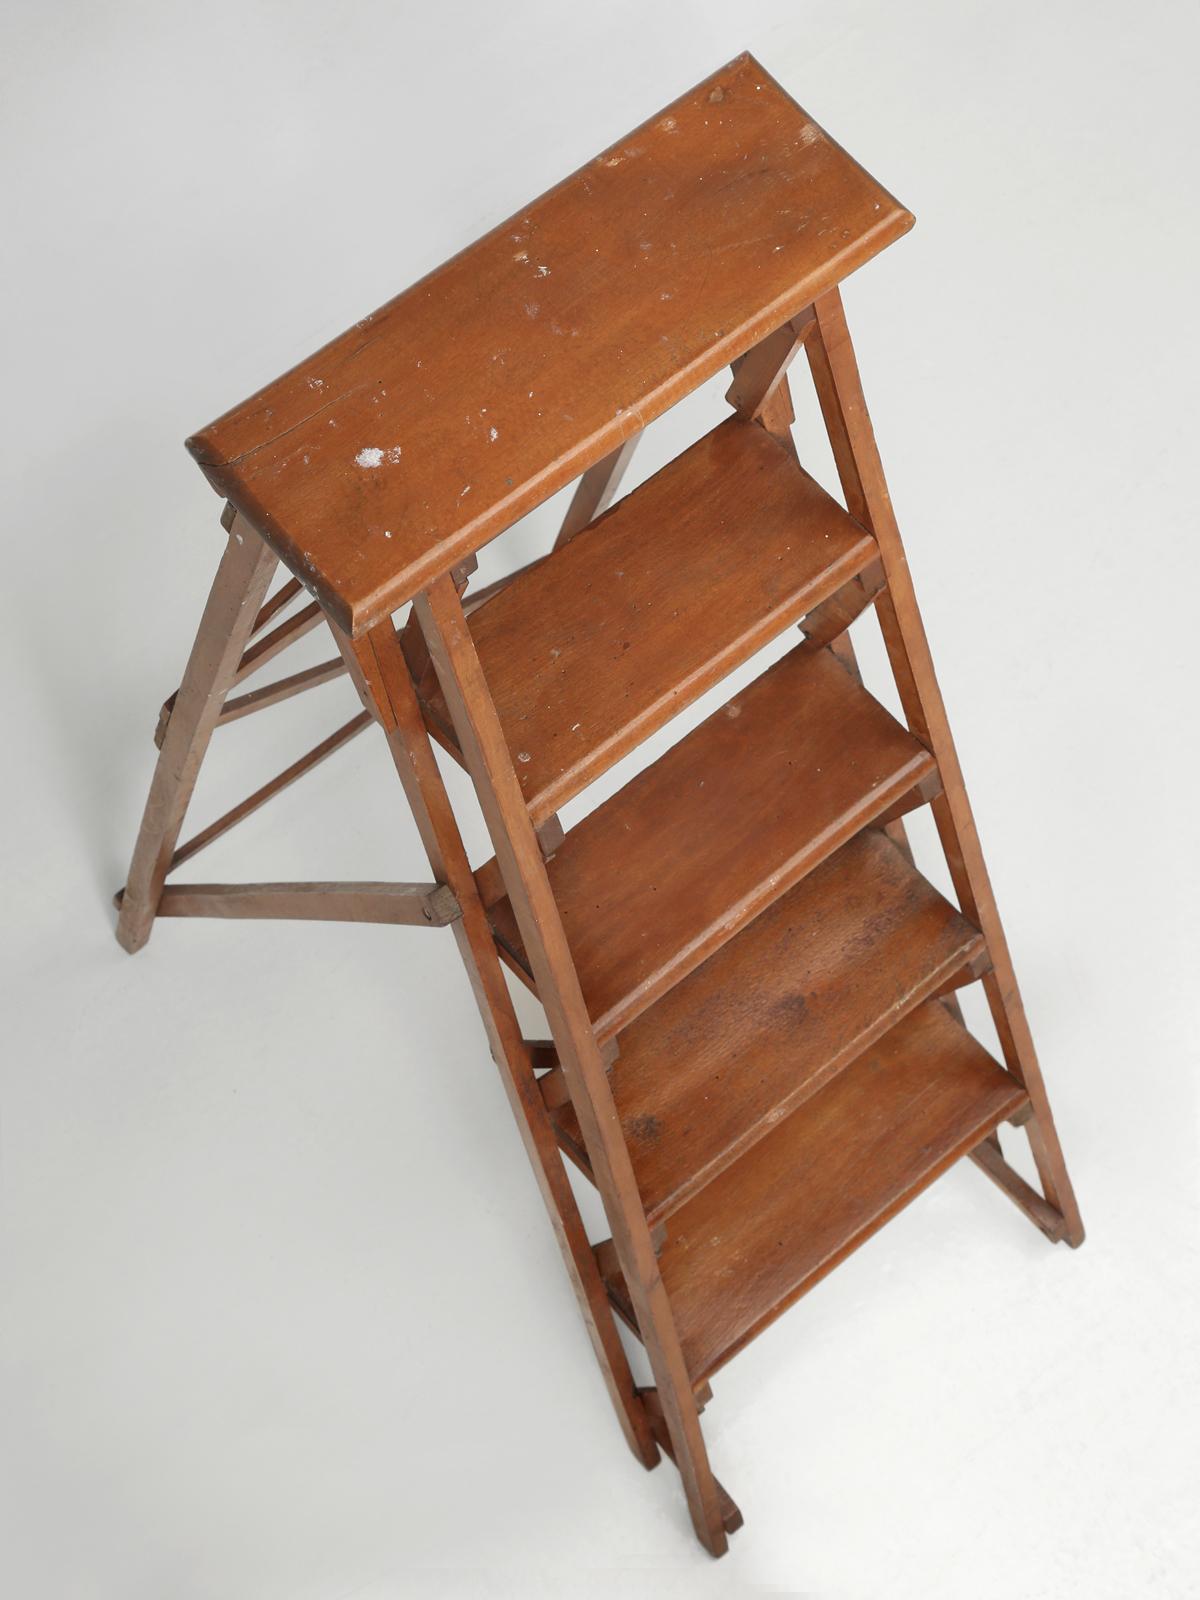 Vintage French folding wooden ladder that one could use to display small rugs or towels? All original finish.
Retains original patina with paint drips and all. Please note that the bottom is missing a piece, best seen in images 14 & 18.
The depth of